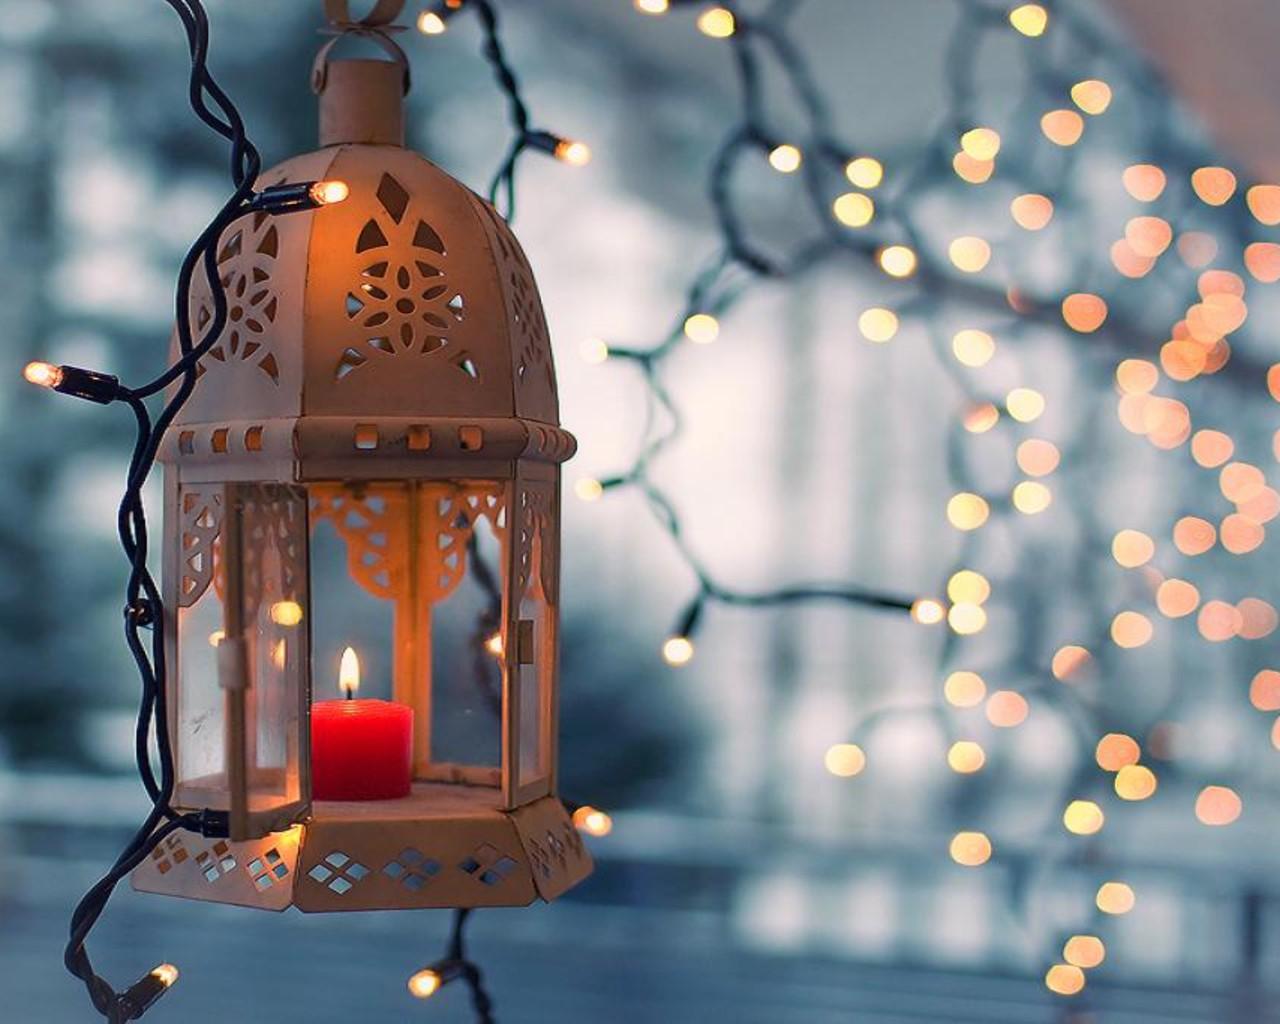 A red candle in a lantern with fairy lights in the background. - Fairy lights